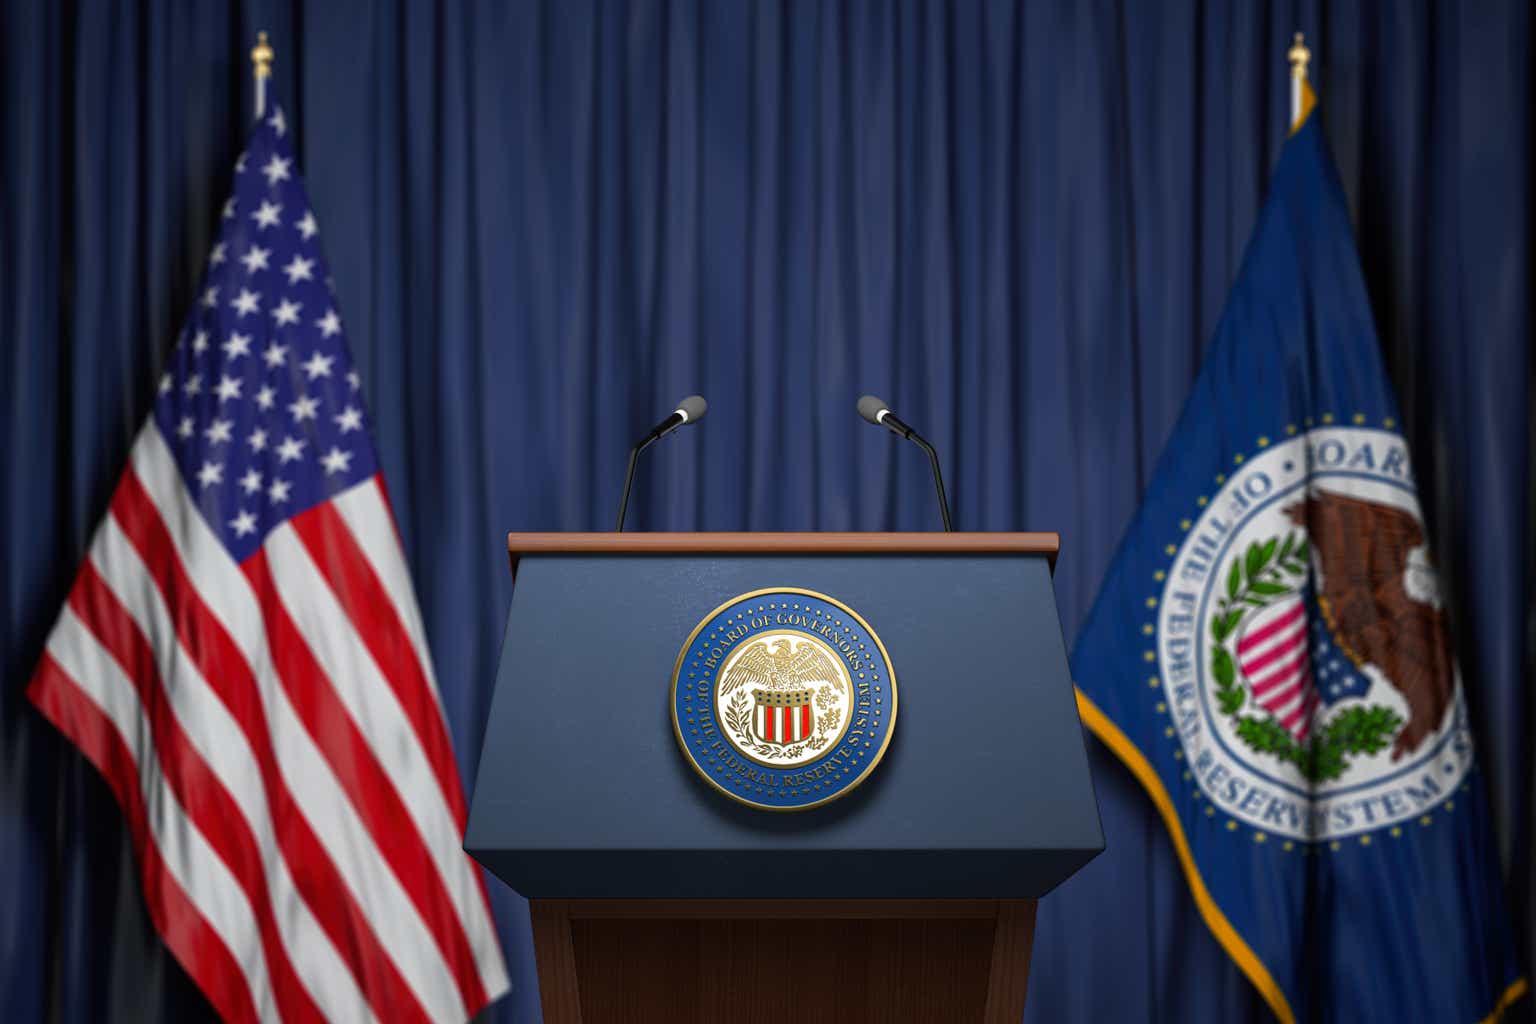 federal reserve board of governors podium image